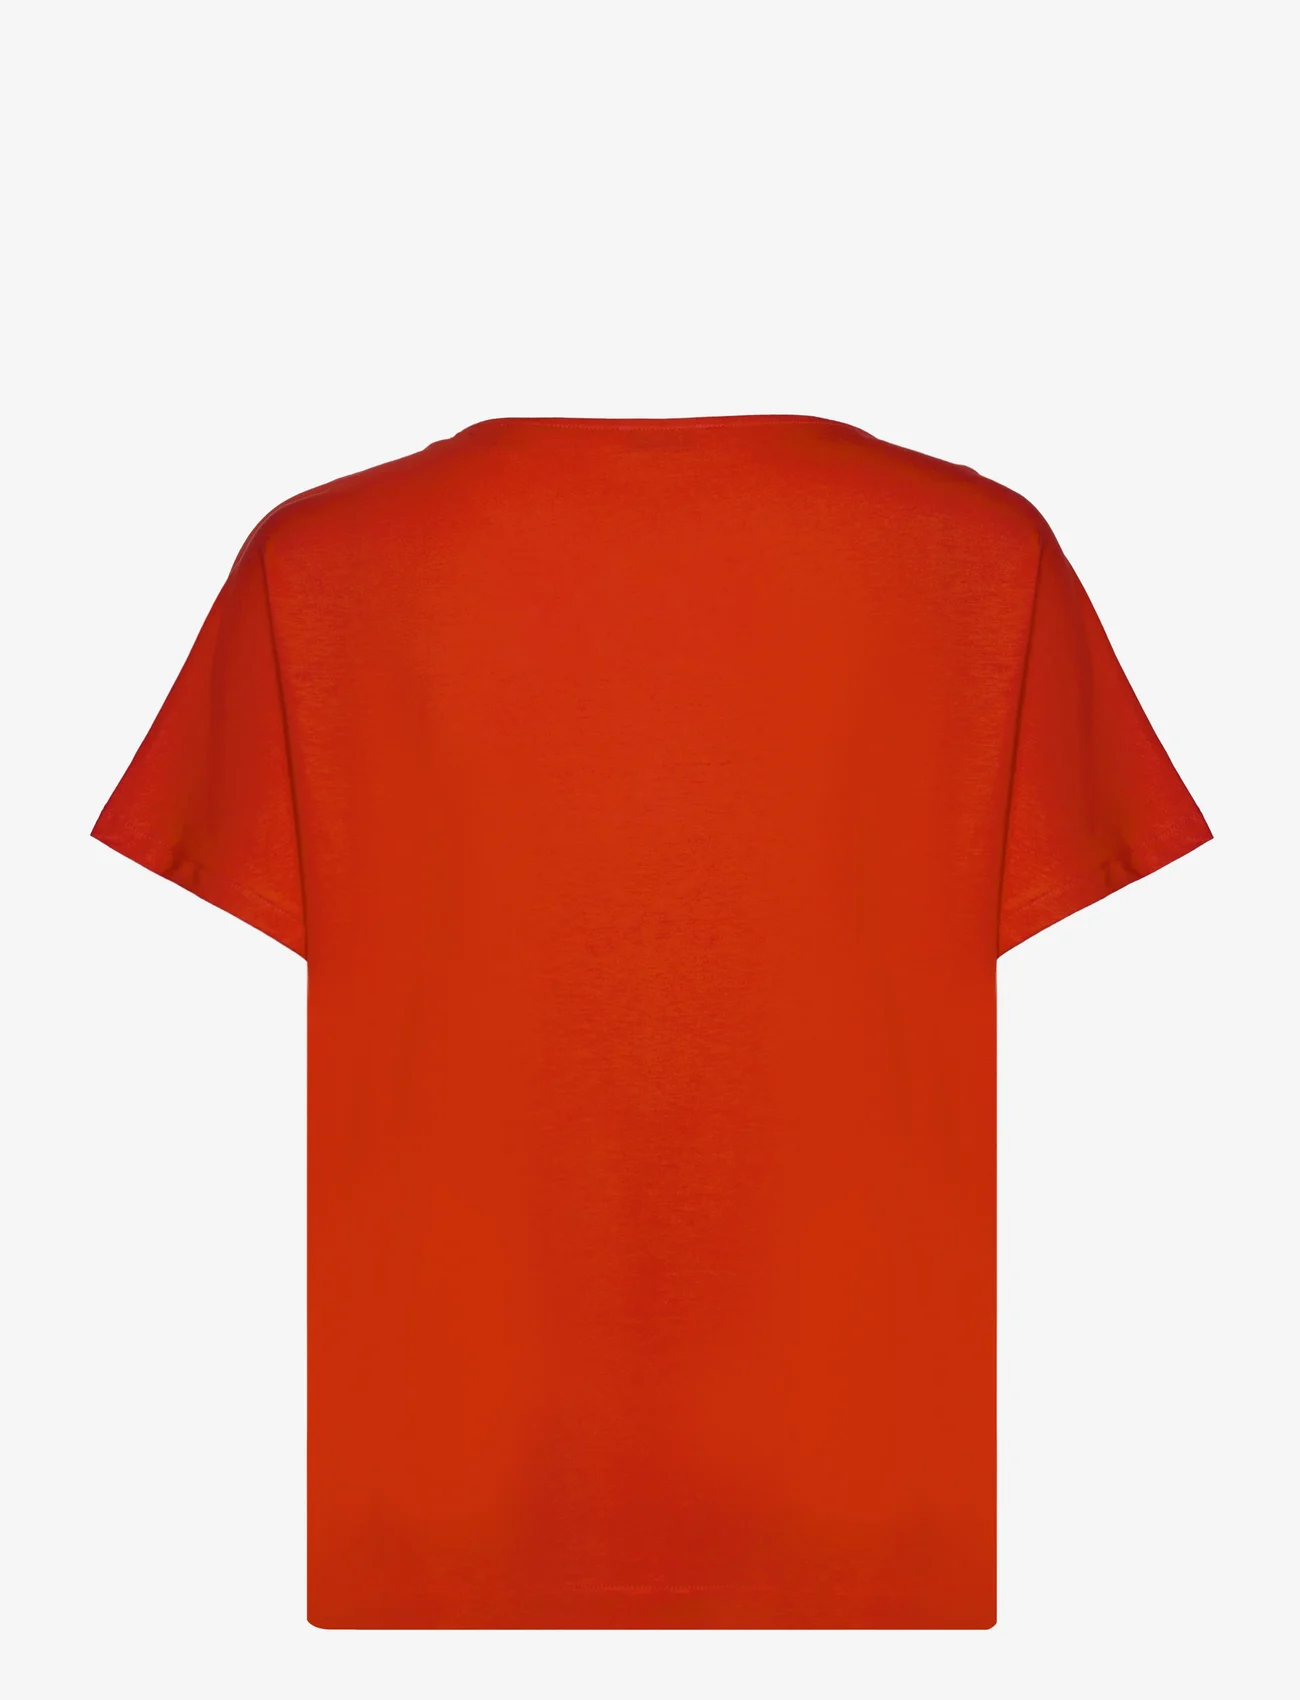 Esprit Casual - T-Shirts - t-shirts - red - 1